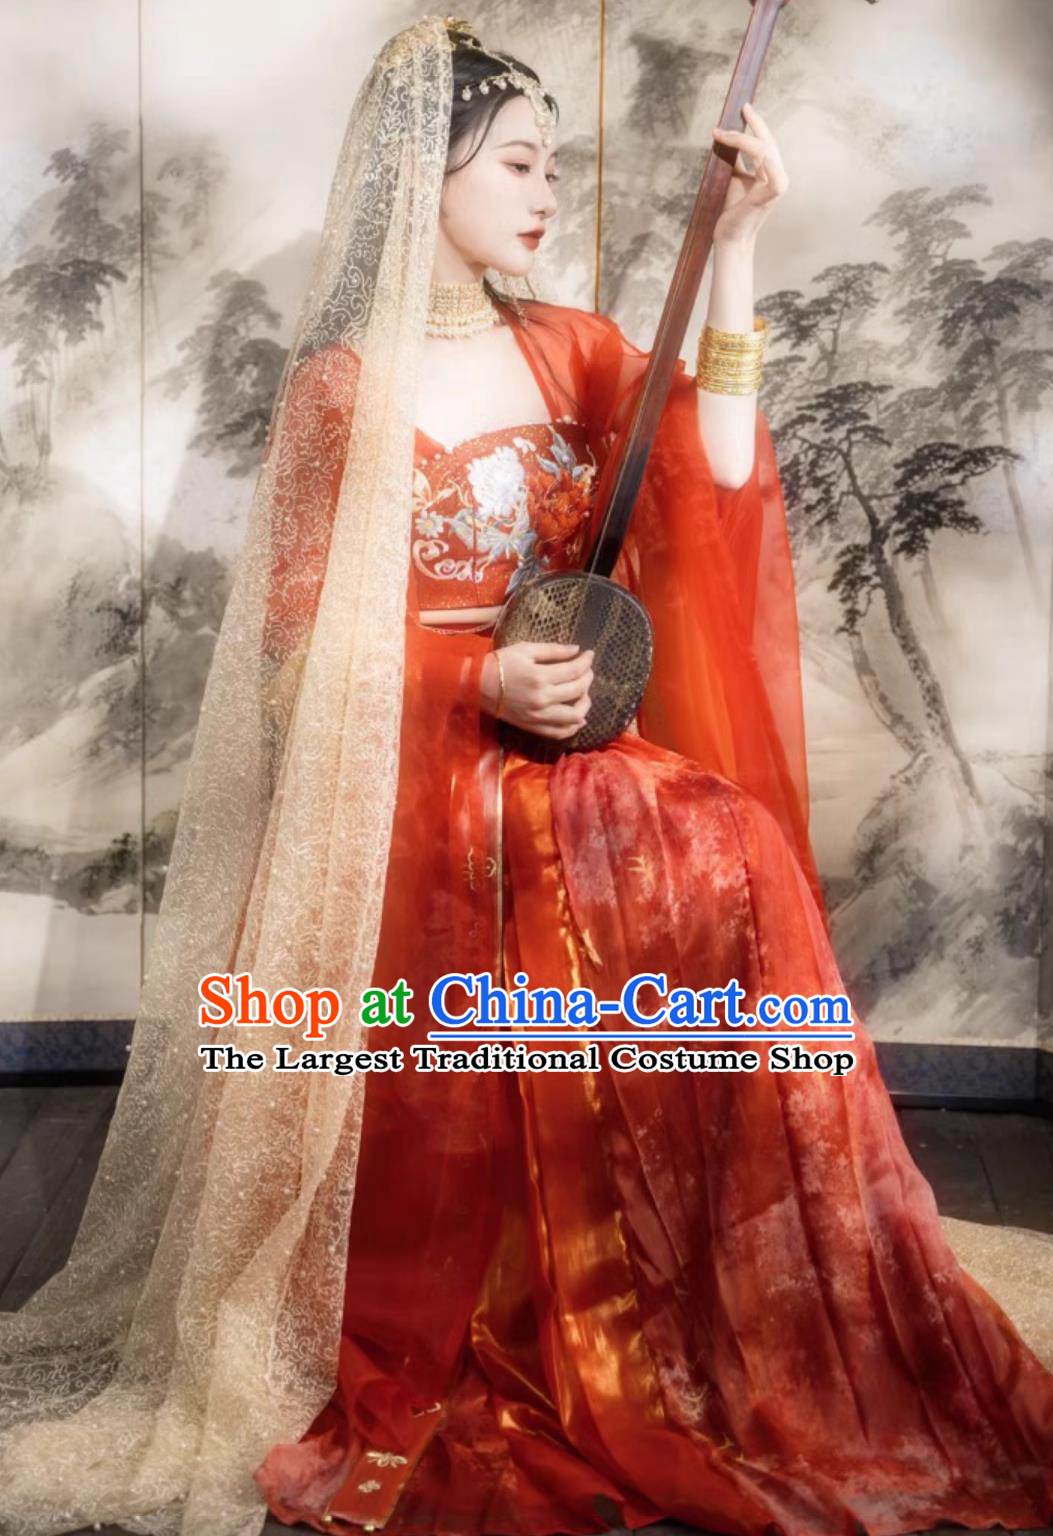 Traditional Ancient Western Regions Dance Lady Red Dresses Chinese Ethnic Princess Costume Hanfu Clothing Online Shop